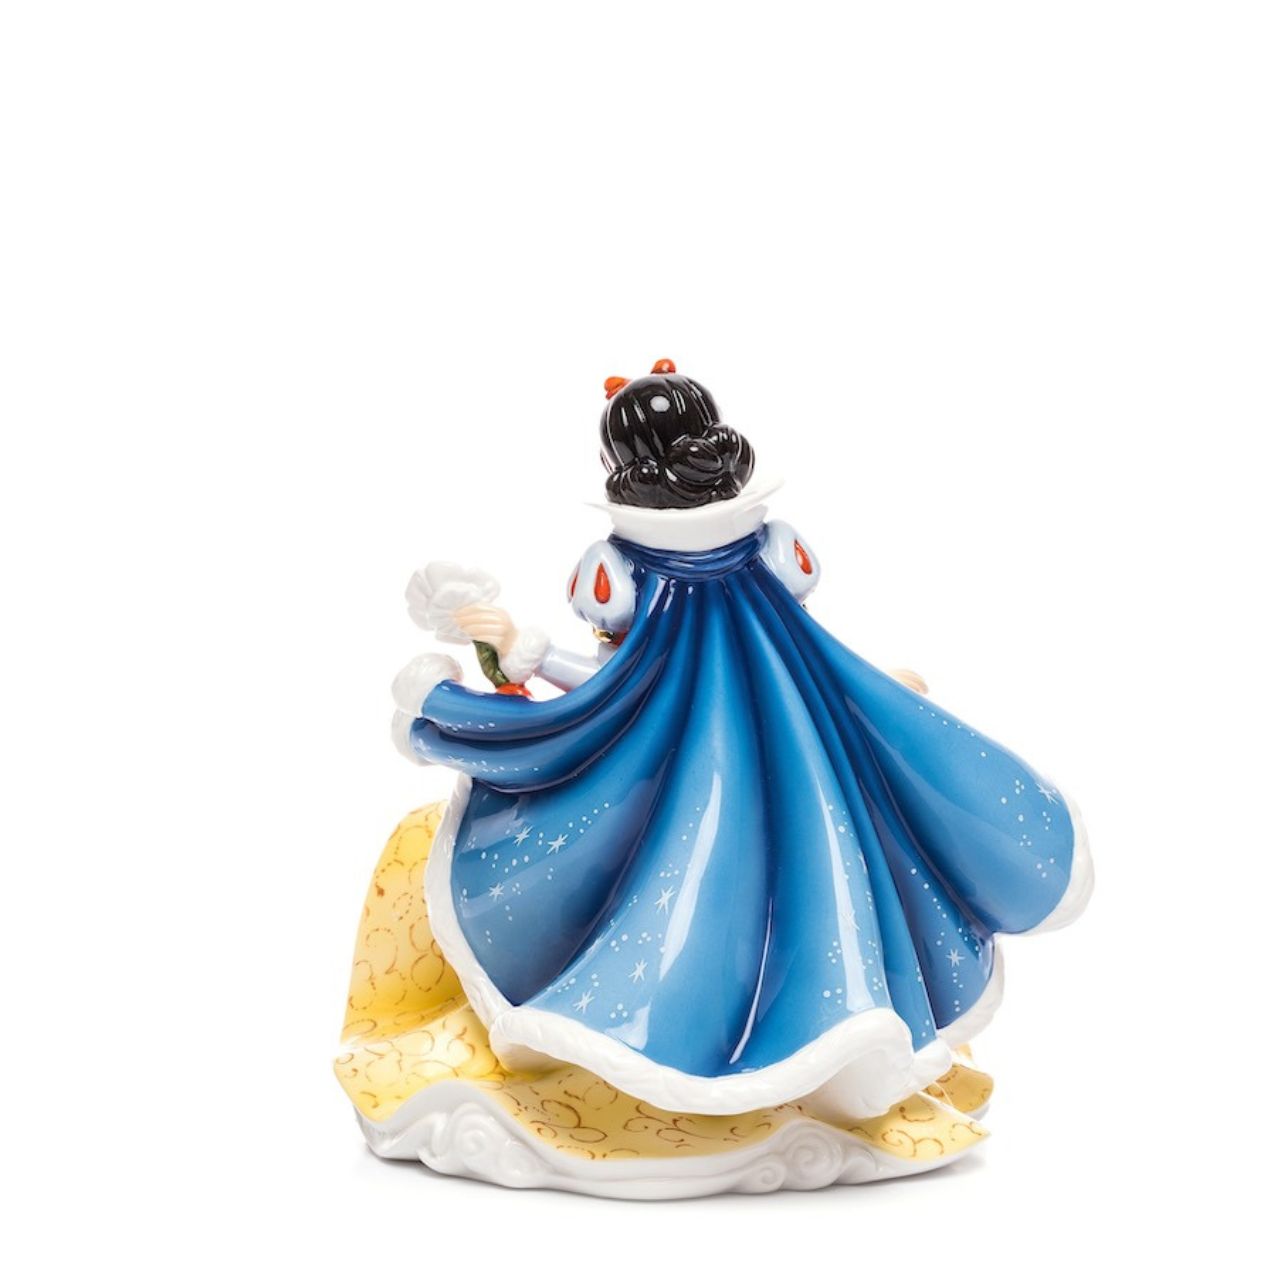 Disney Classic Snow White Disney Princess Figurine  Our gorgeous Snow White figurine is the first of our Disney Princesses which is made in a limited edition. Only 3000 will be made – worldwide – so make sure you get yours before they sell out.